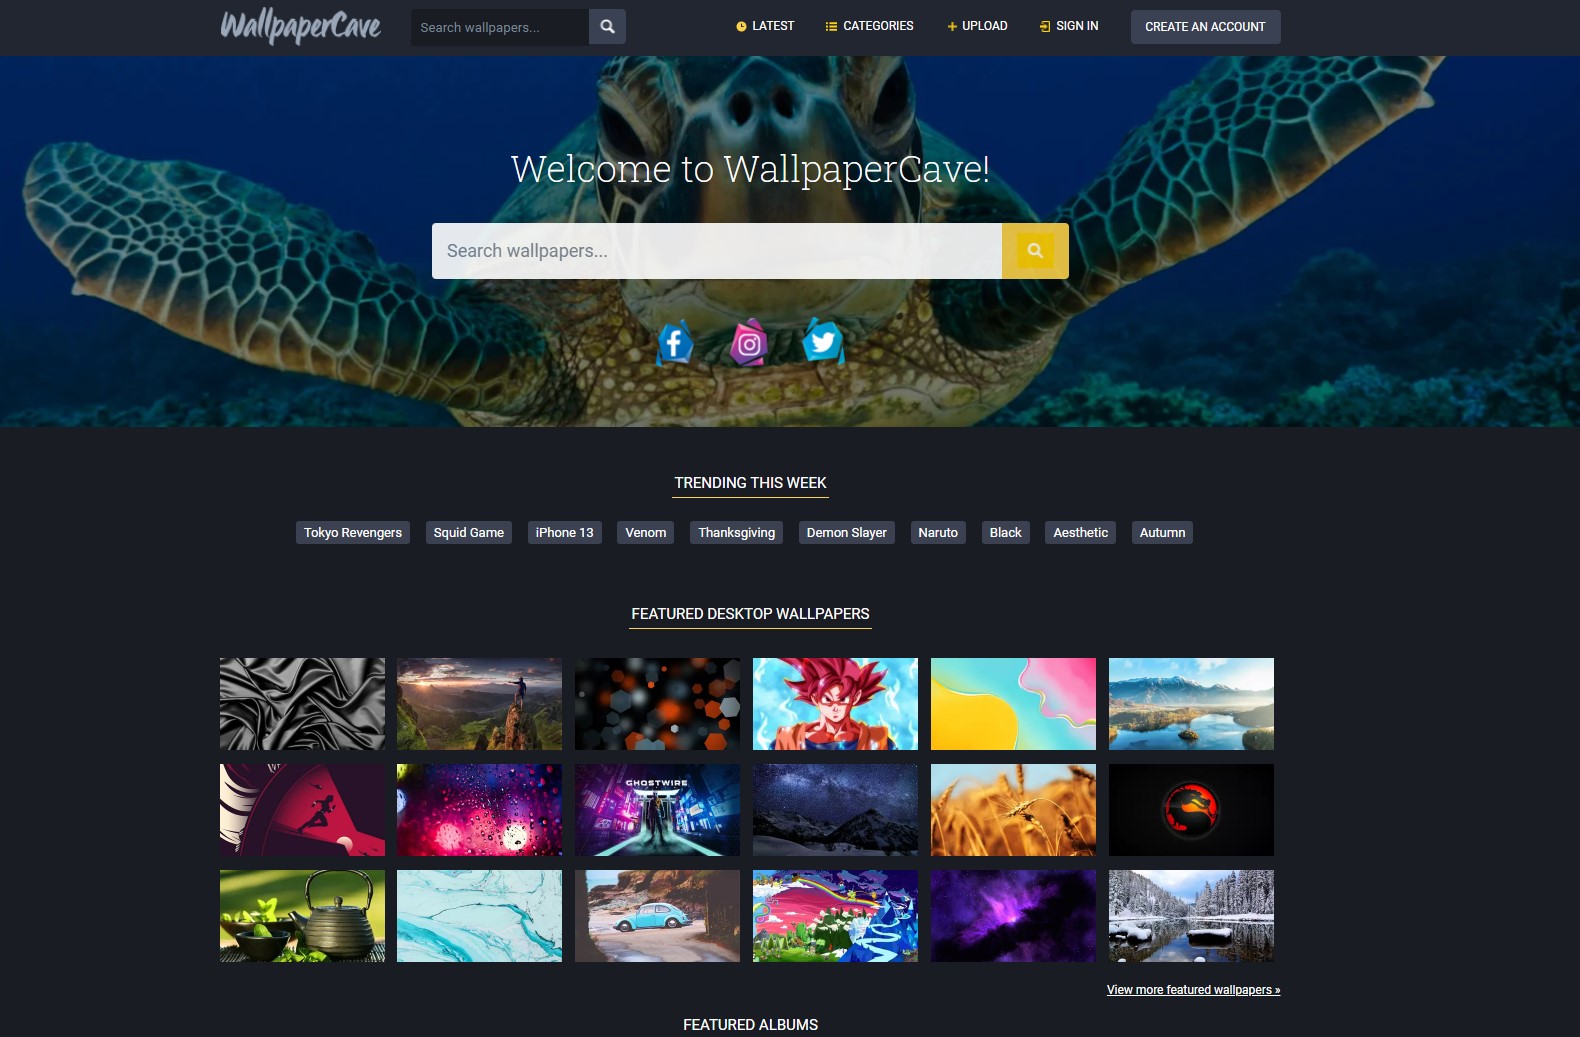 WallpaperCave is an online community of desktop wallpapers enthusiasts. Join now to share and explore tons of collections of awesome wallpapers.